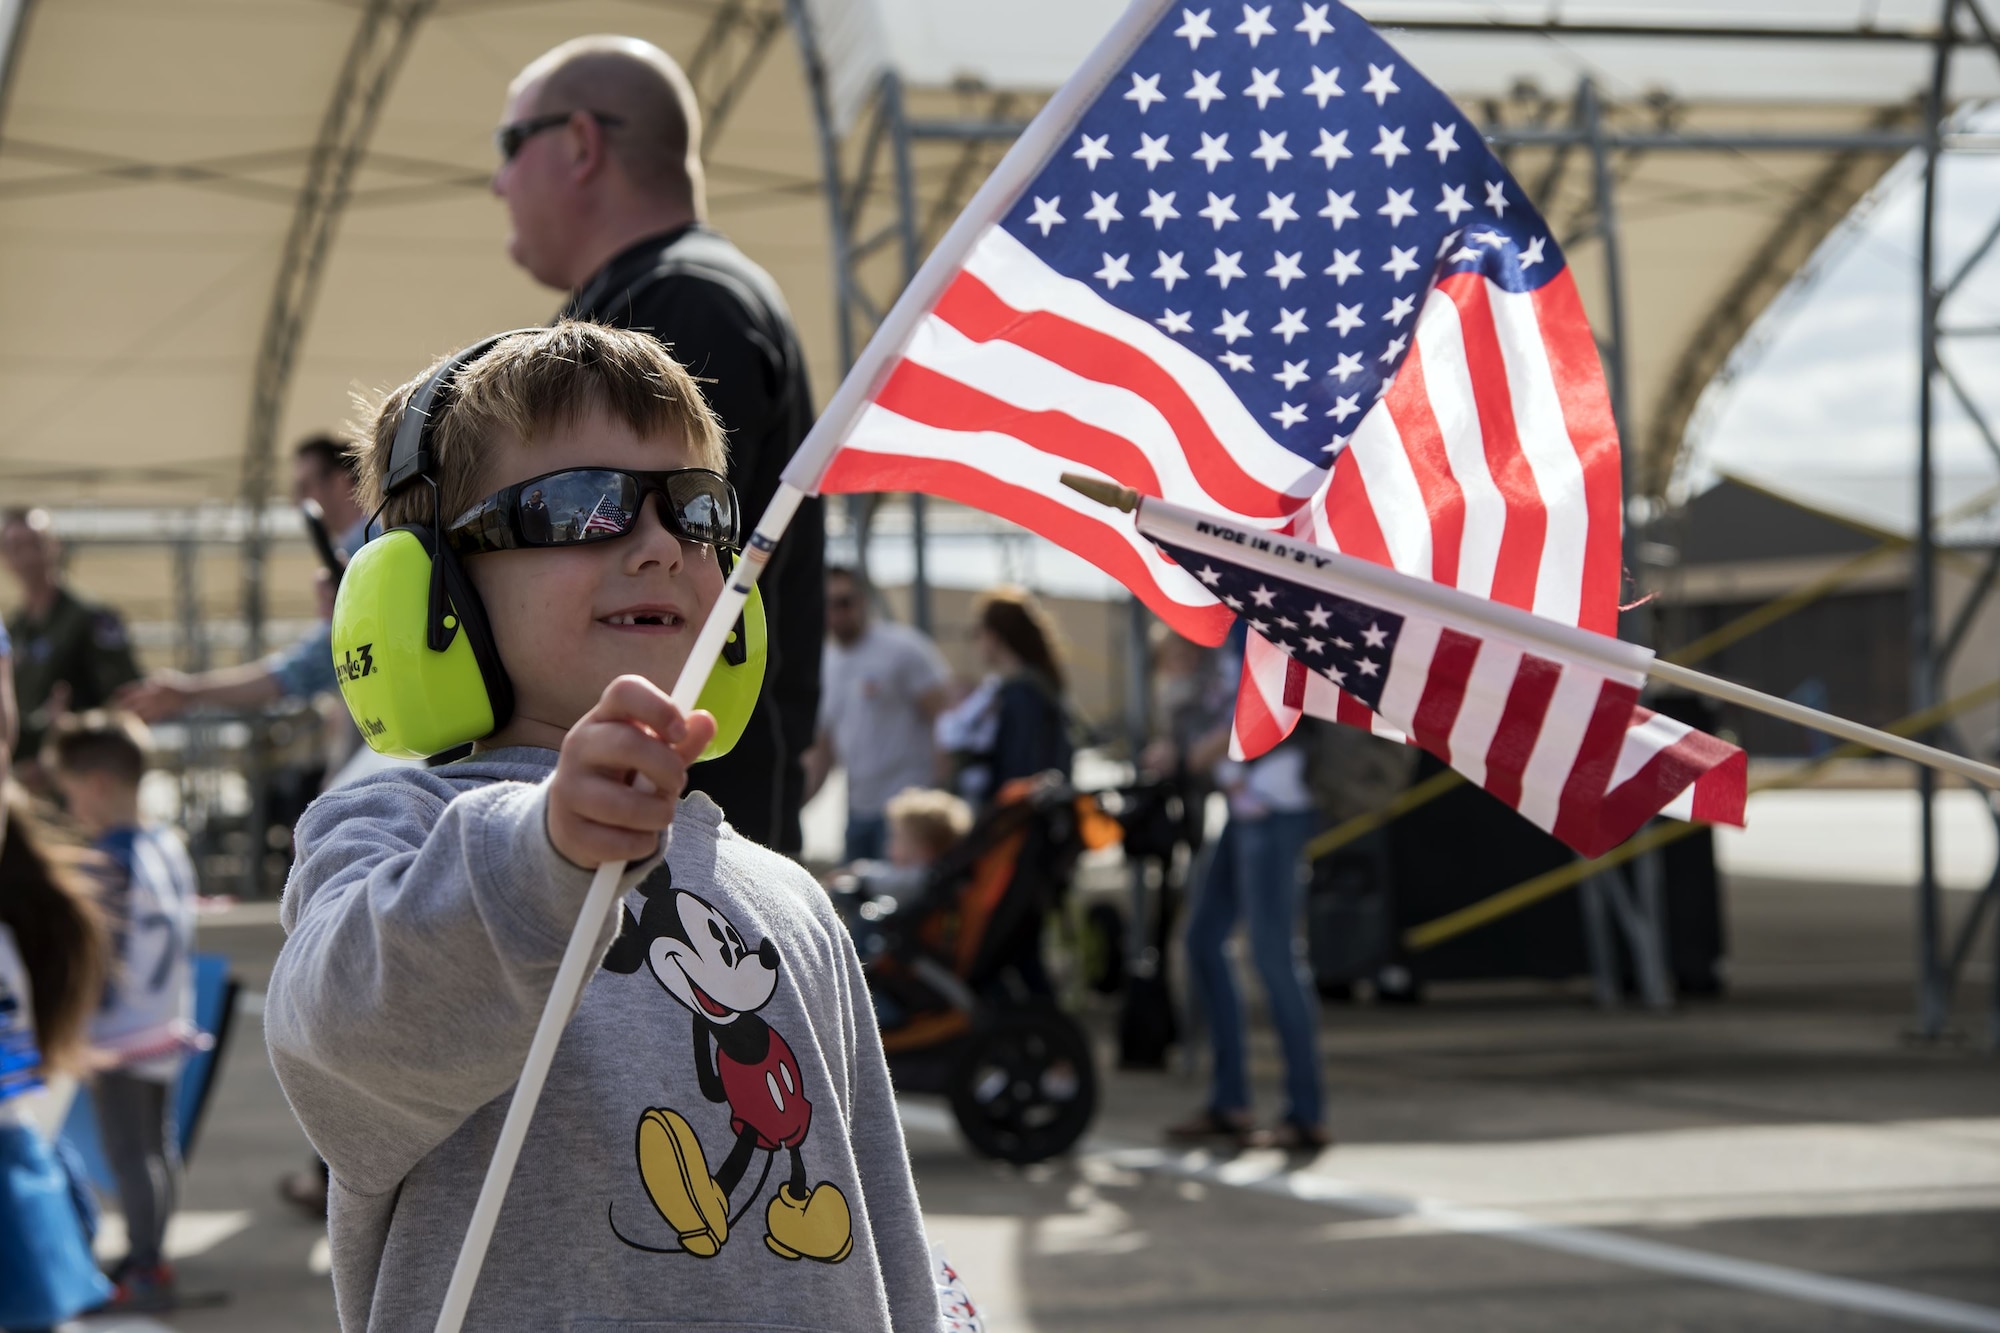 A child waves a flag during a redeployment of the 74th Fighter Squadron (FS) Jan. 26, 2018, at Moody Air Force Base, Ga. During the seven-month deployment the 74th FS flew more than 1,700 sorties, employed weapons more than 4,400 times, destroyed 2,300 targets and killed 2,800 insurgents. (U.S. Air Force photo by Airman Eugene Oliver)